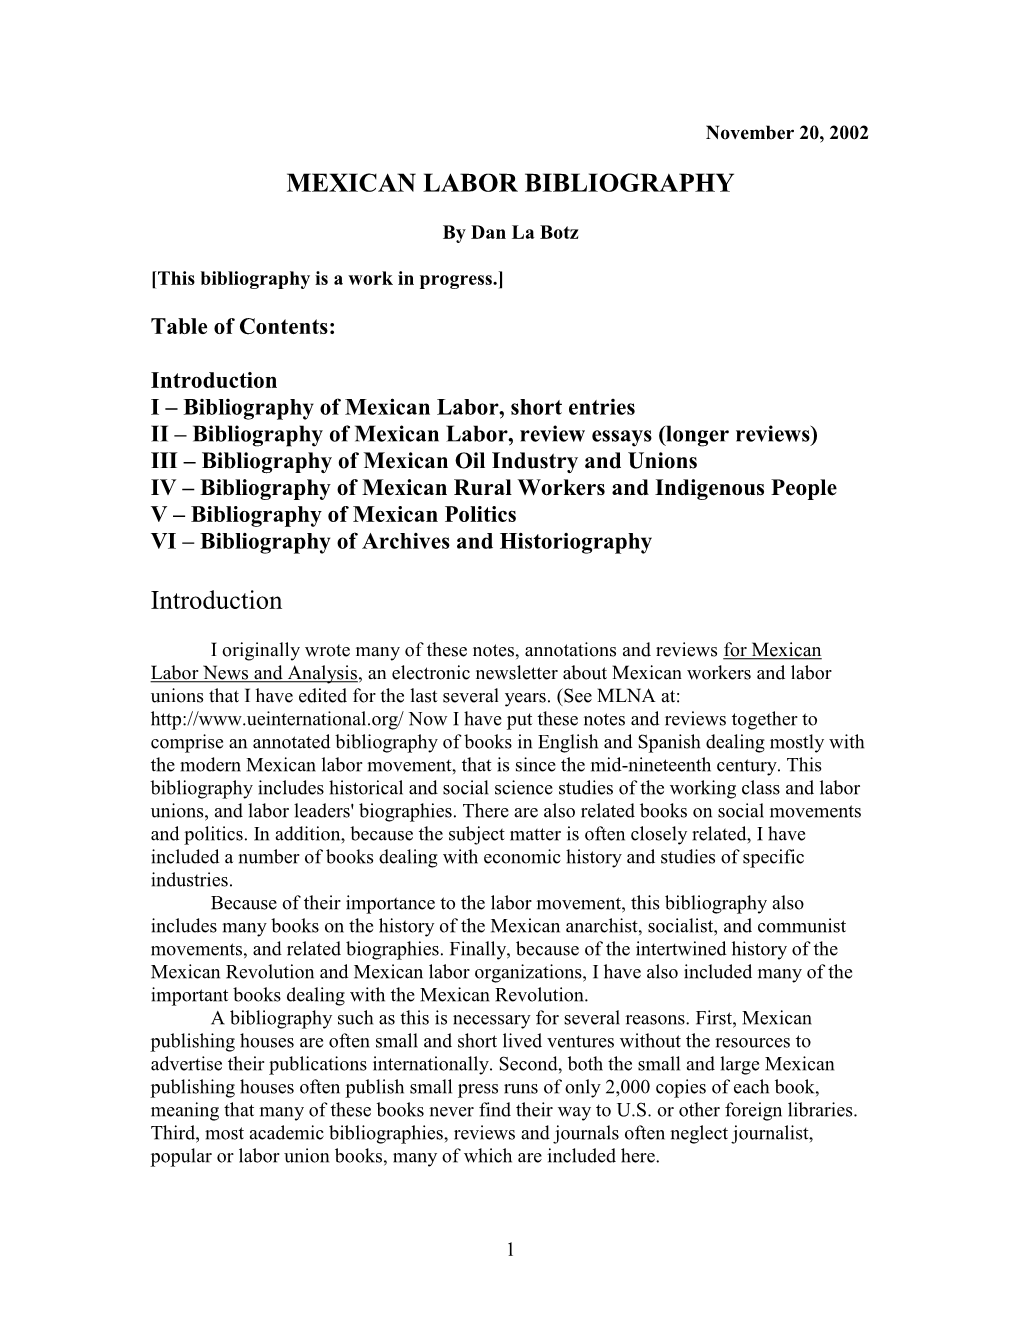 MEXICAN LABOR BIBLIOGRAPHY Introduction